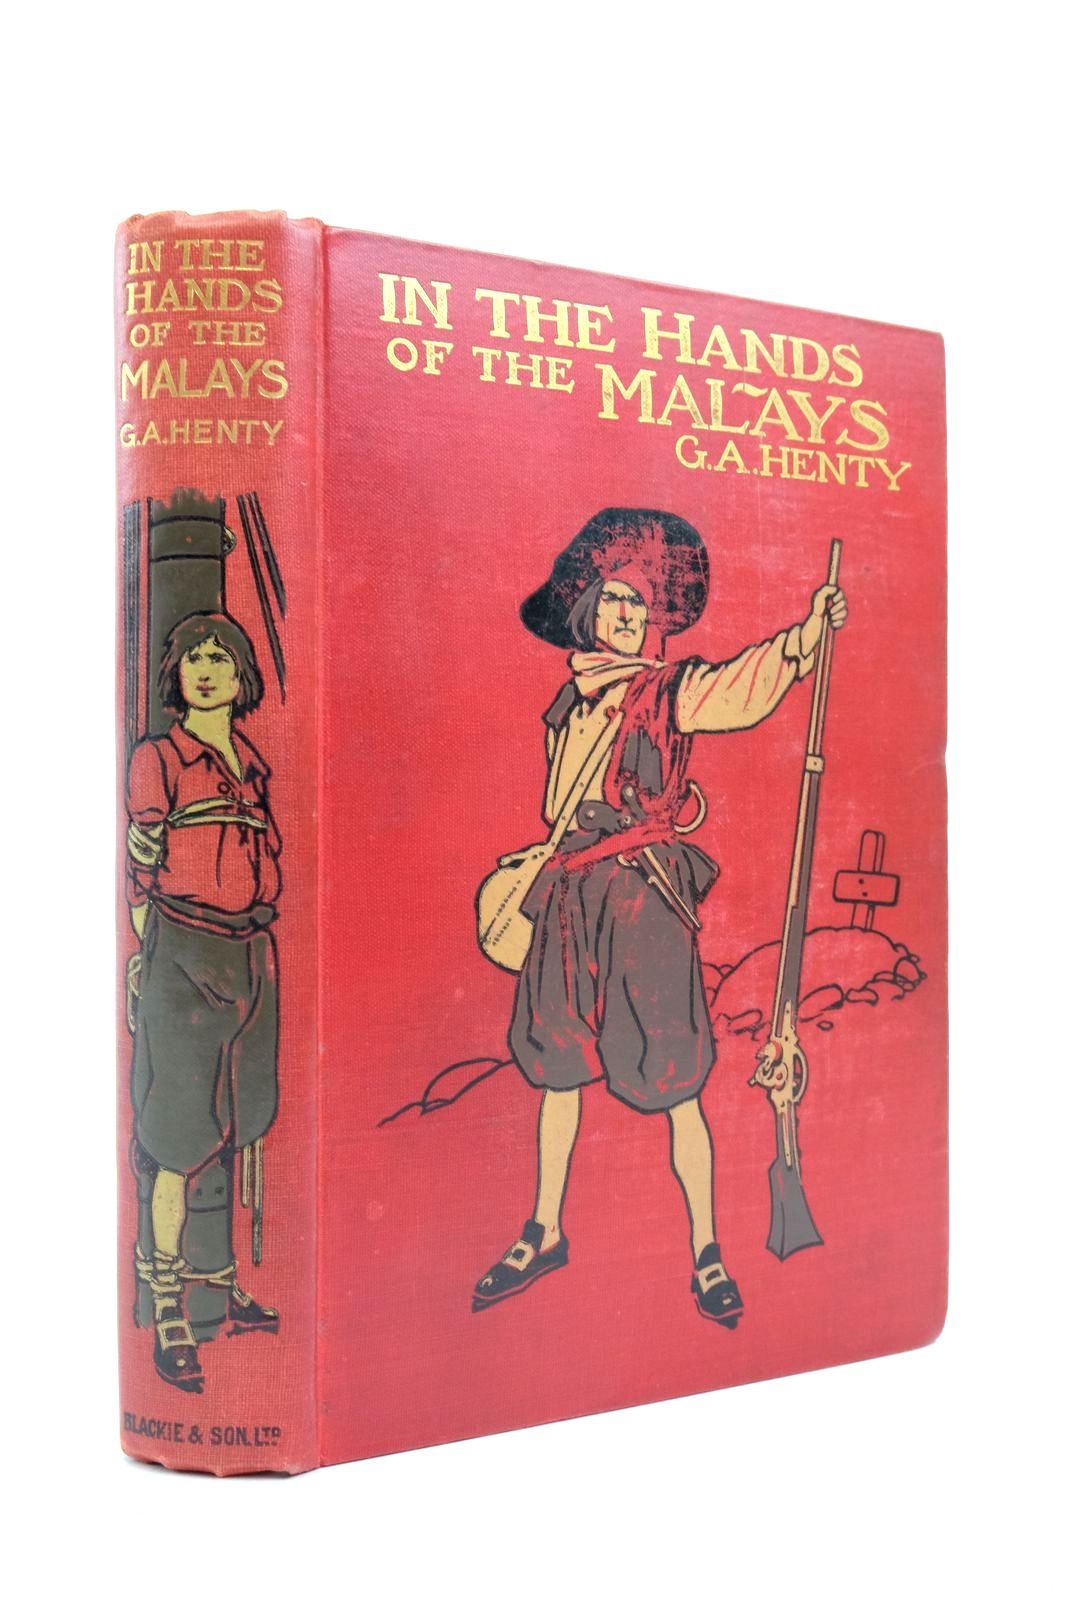 Photo of IN THE HANDS OF THE MALAYS written by Henty, G.A. illustrated by Jellicoe, J. published by Blackie & Son Ltd. (STOCK CODE: 2138160)  for sale by Stella & Rose's Books